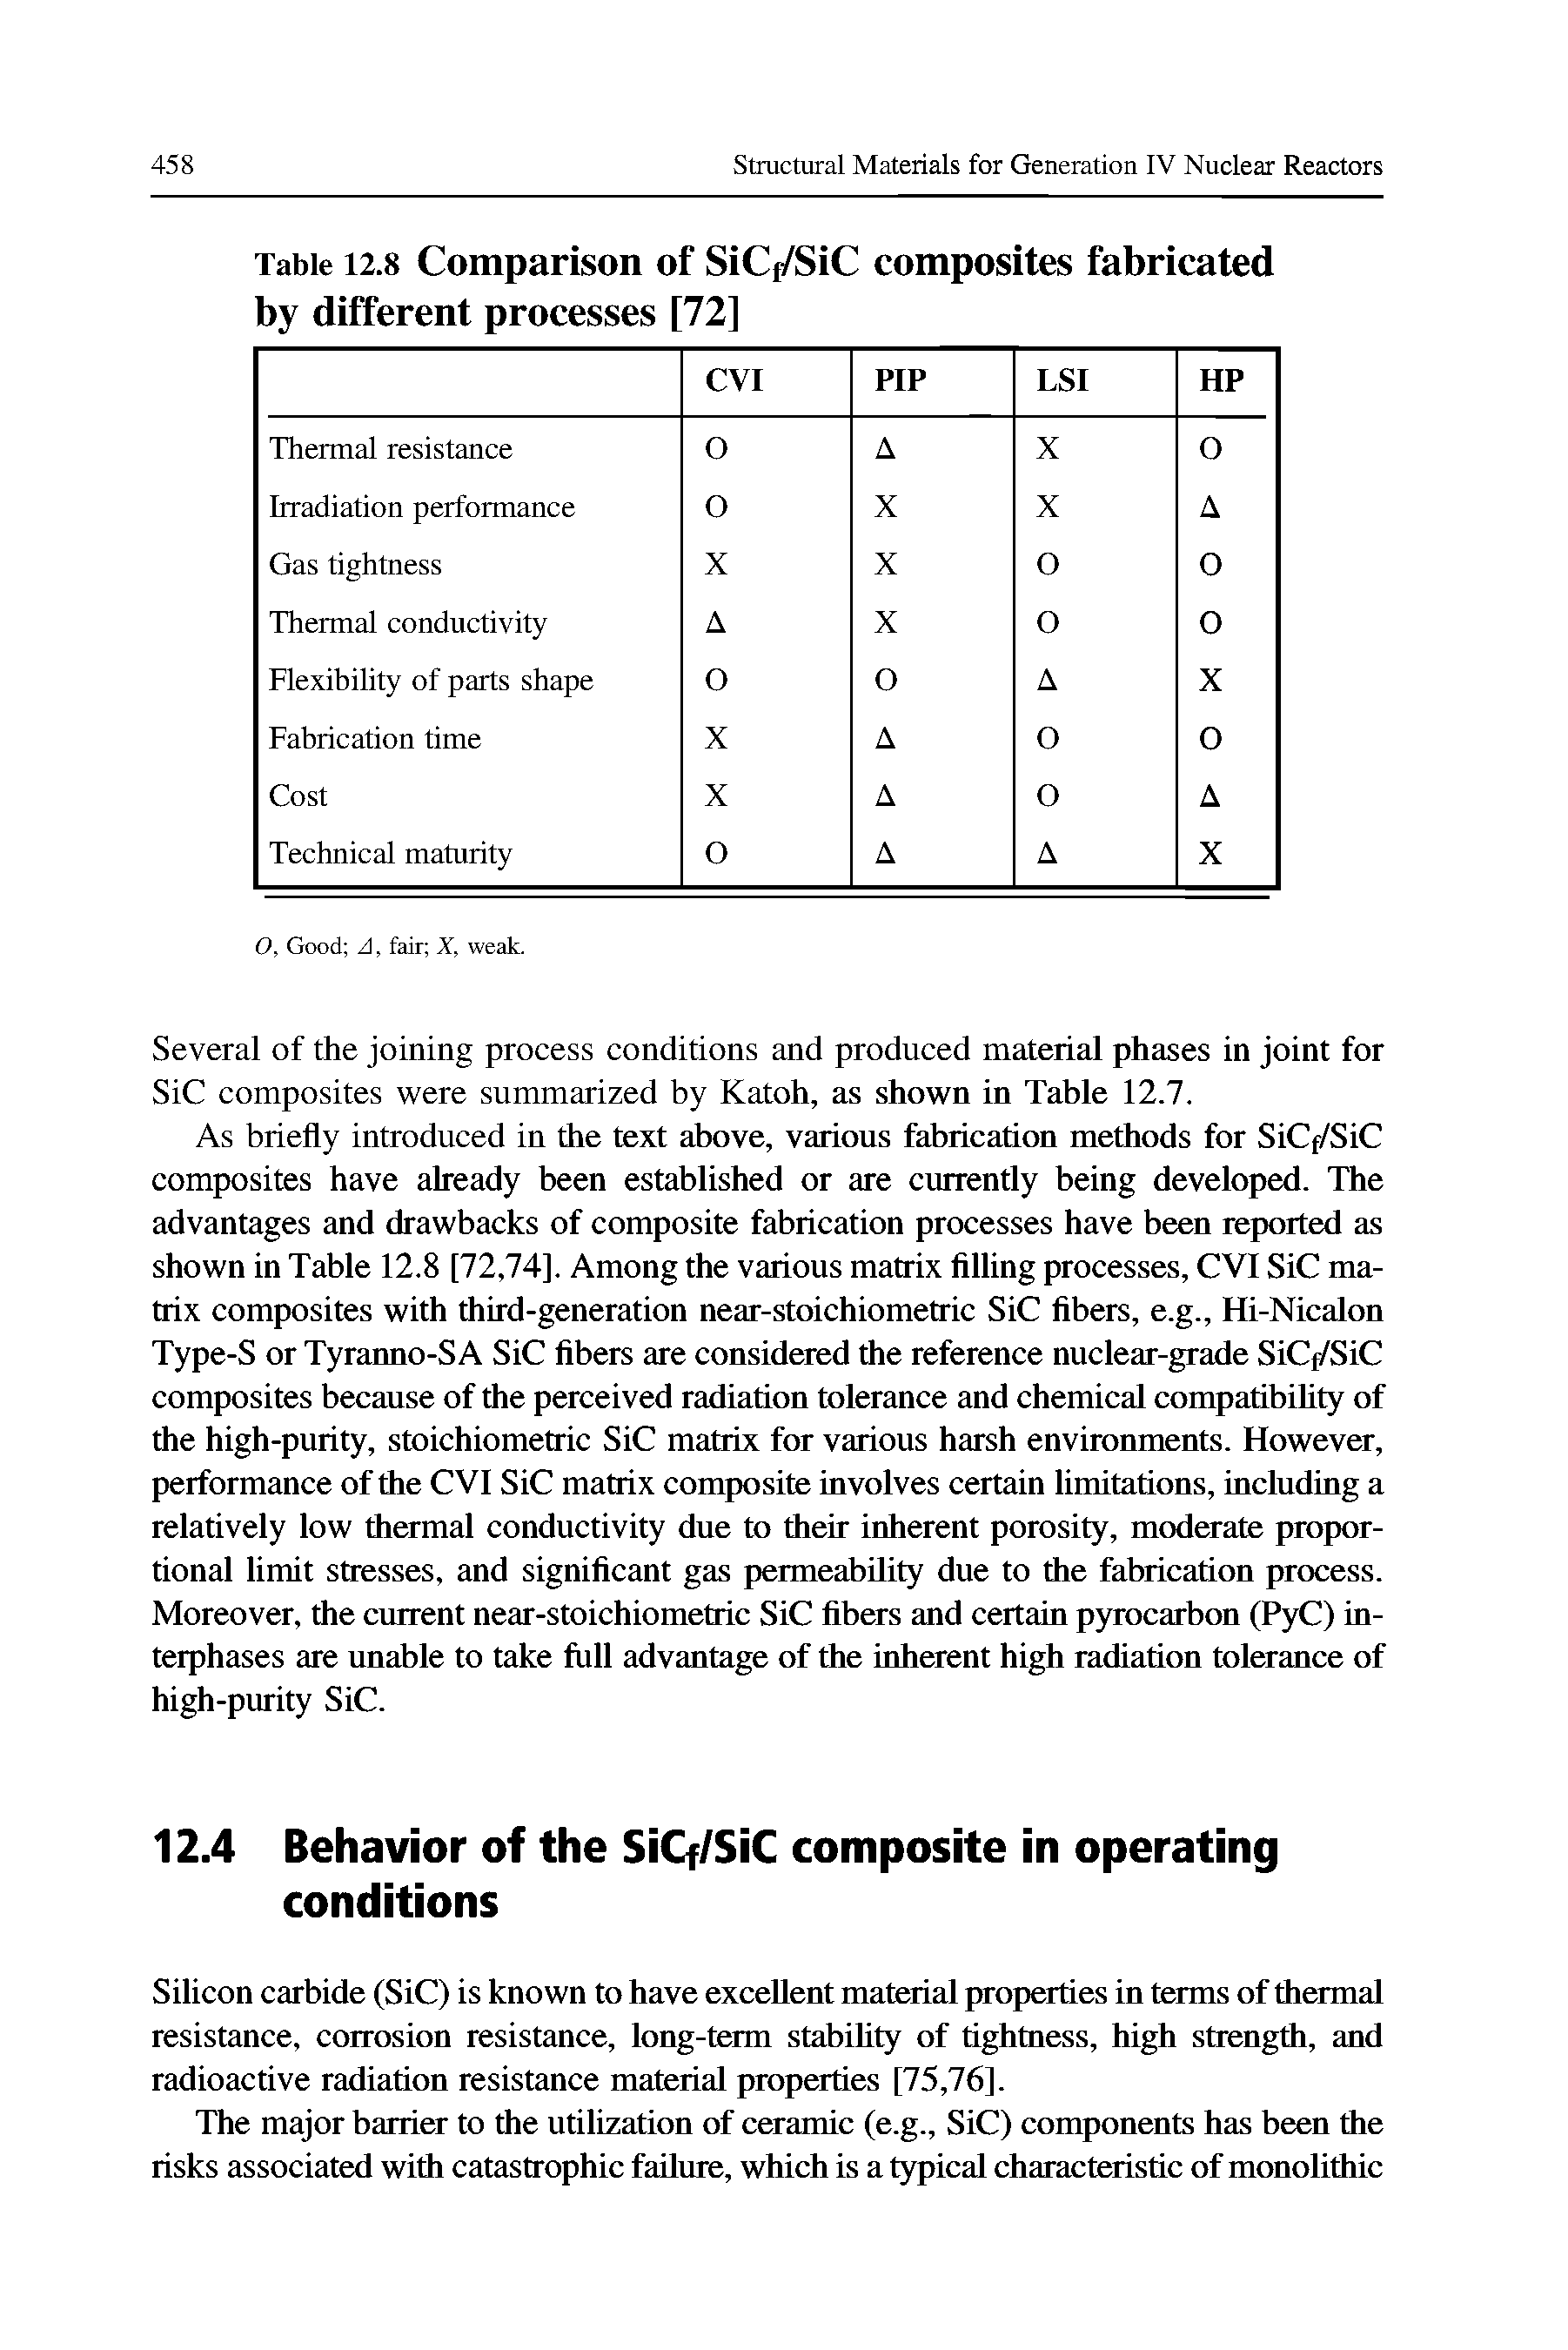 Table 12.8 Comparison of SiC /SiC composites fabricated by different processes [72]...